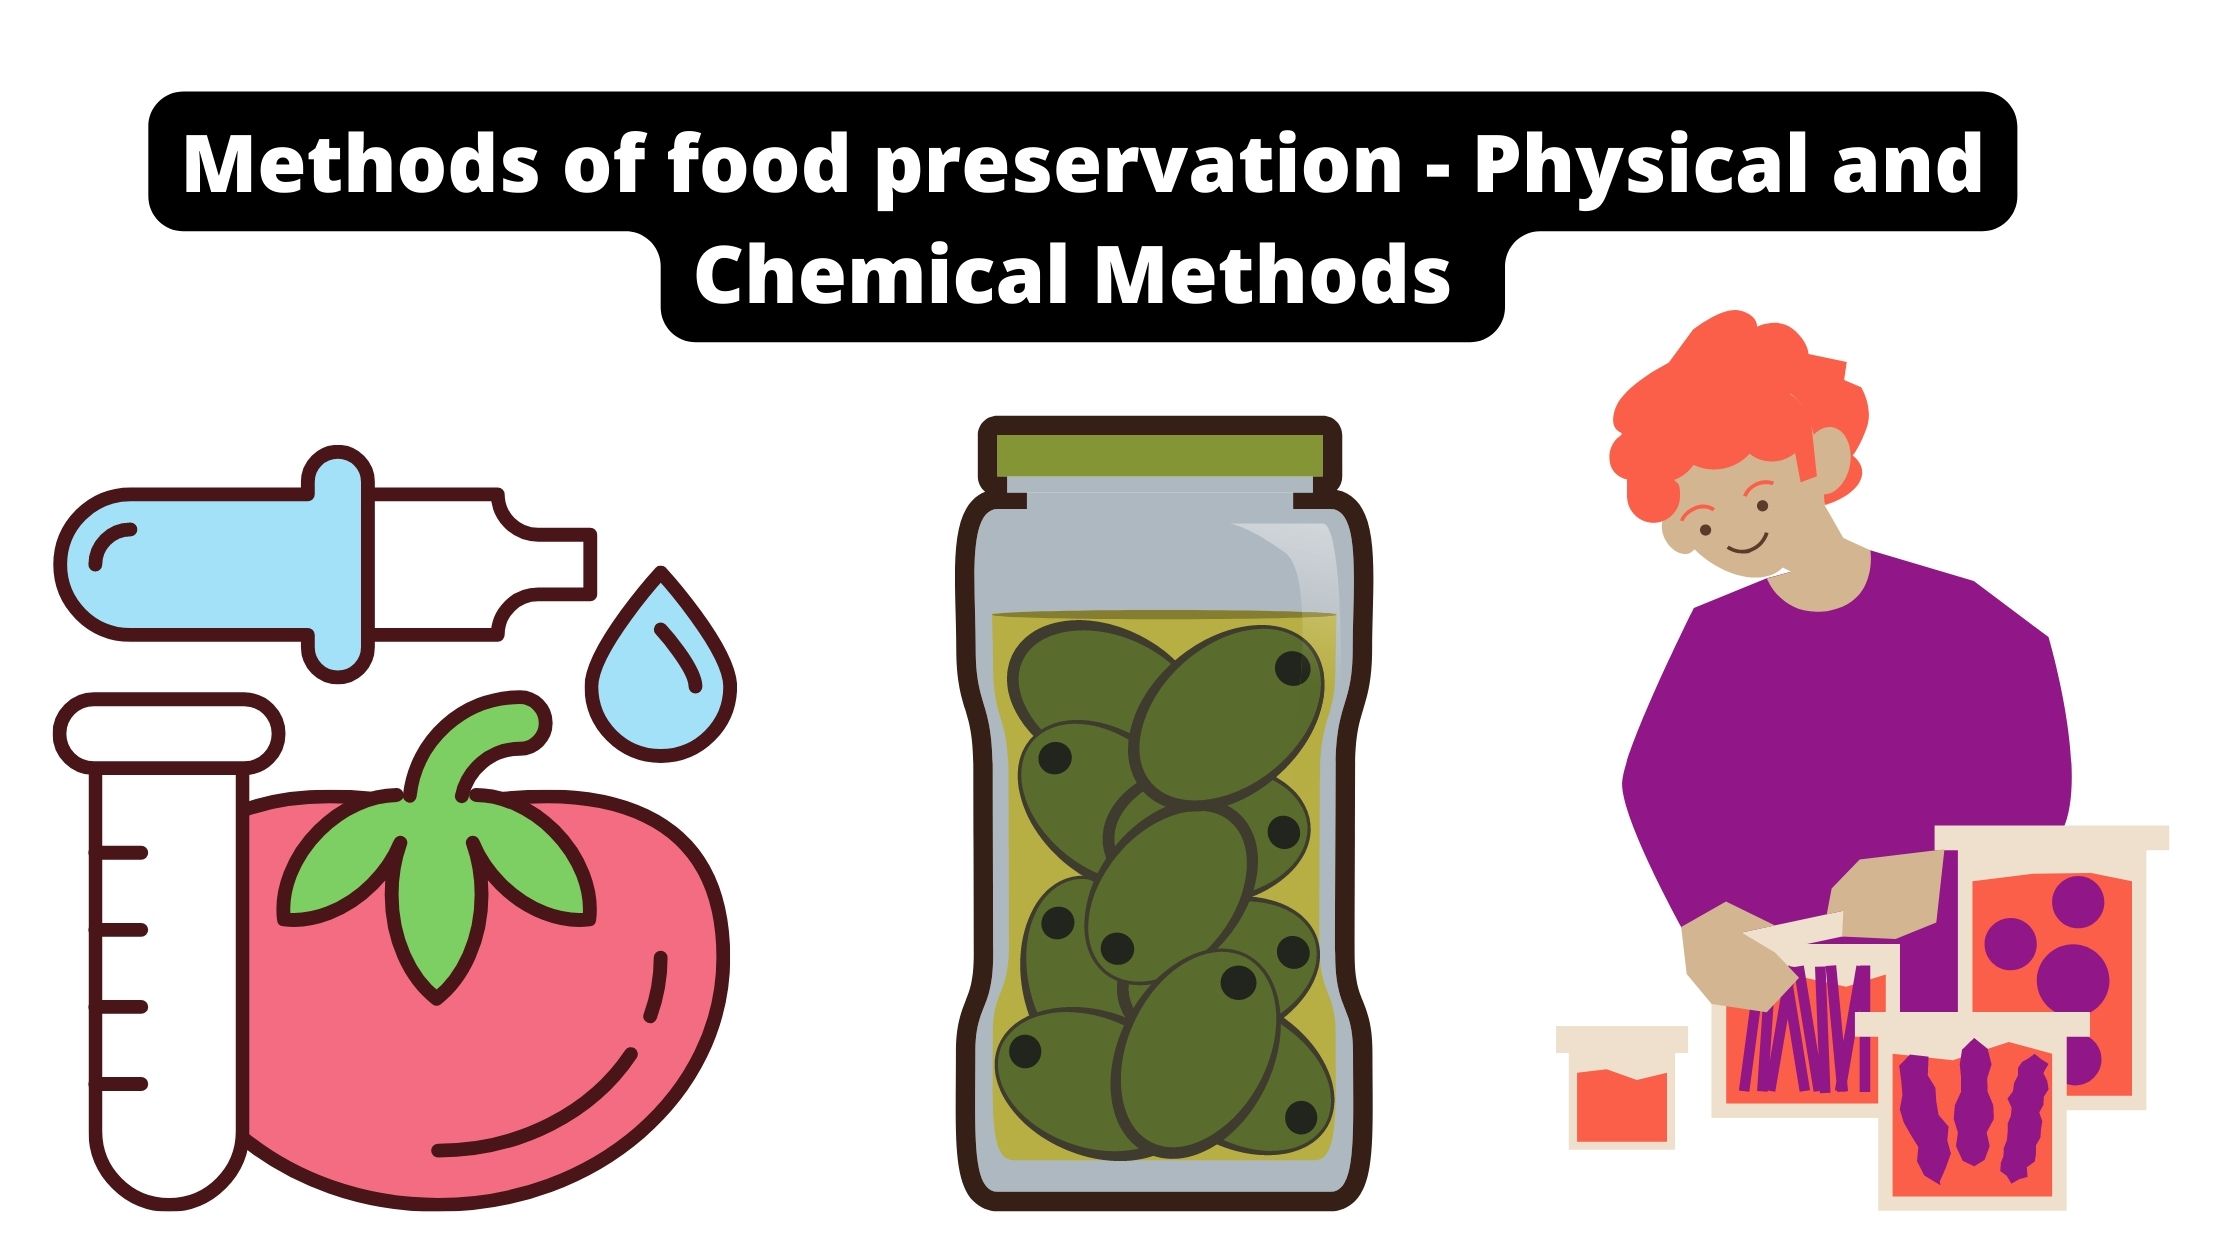 Methods of food preservation - Physical and Chemical Methods 